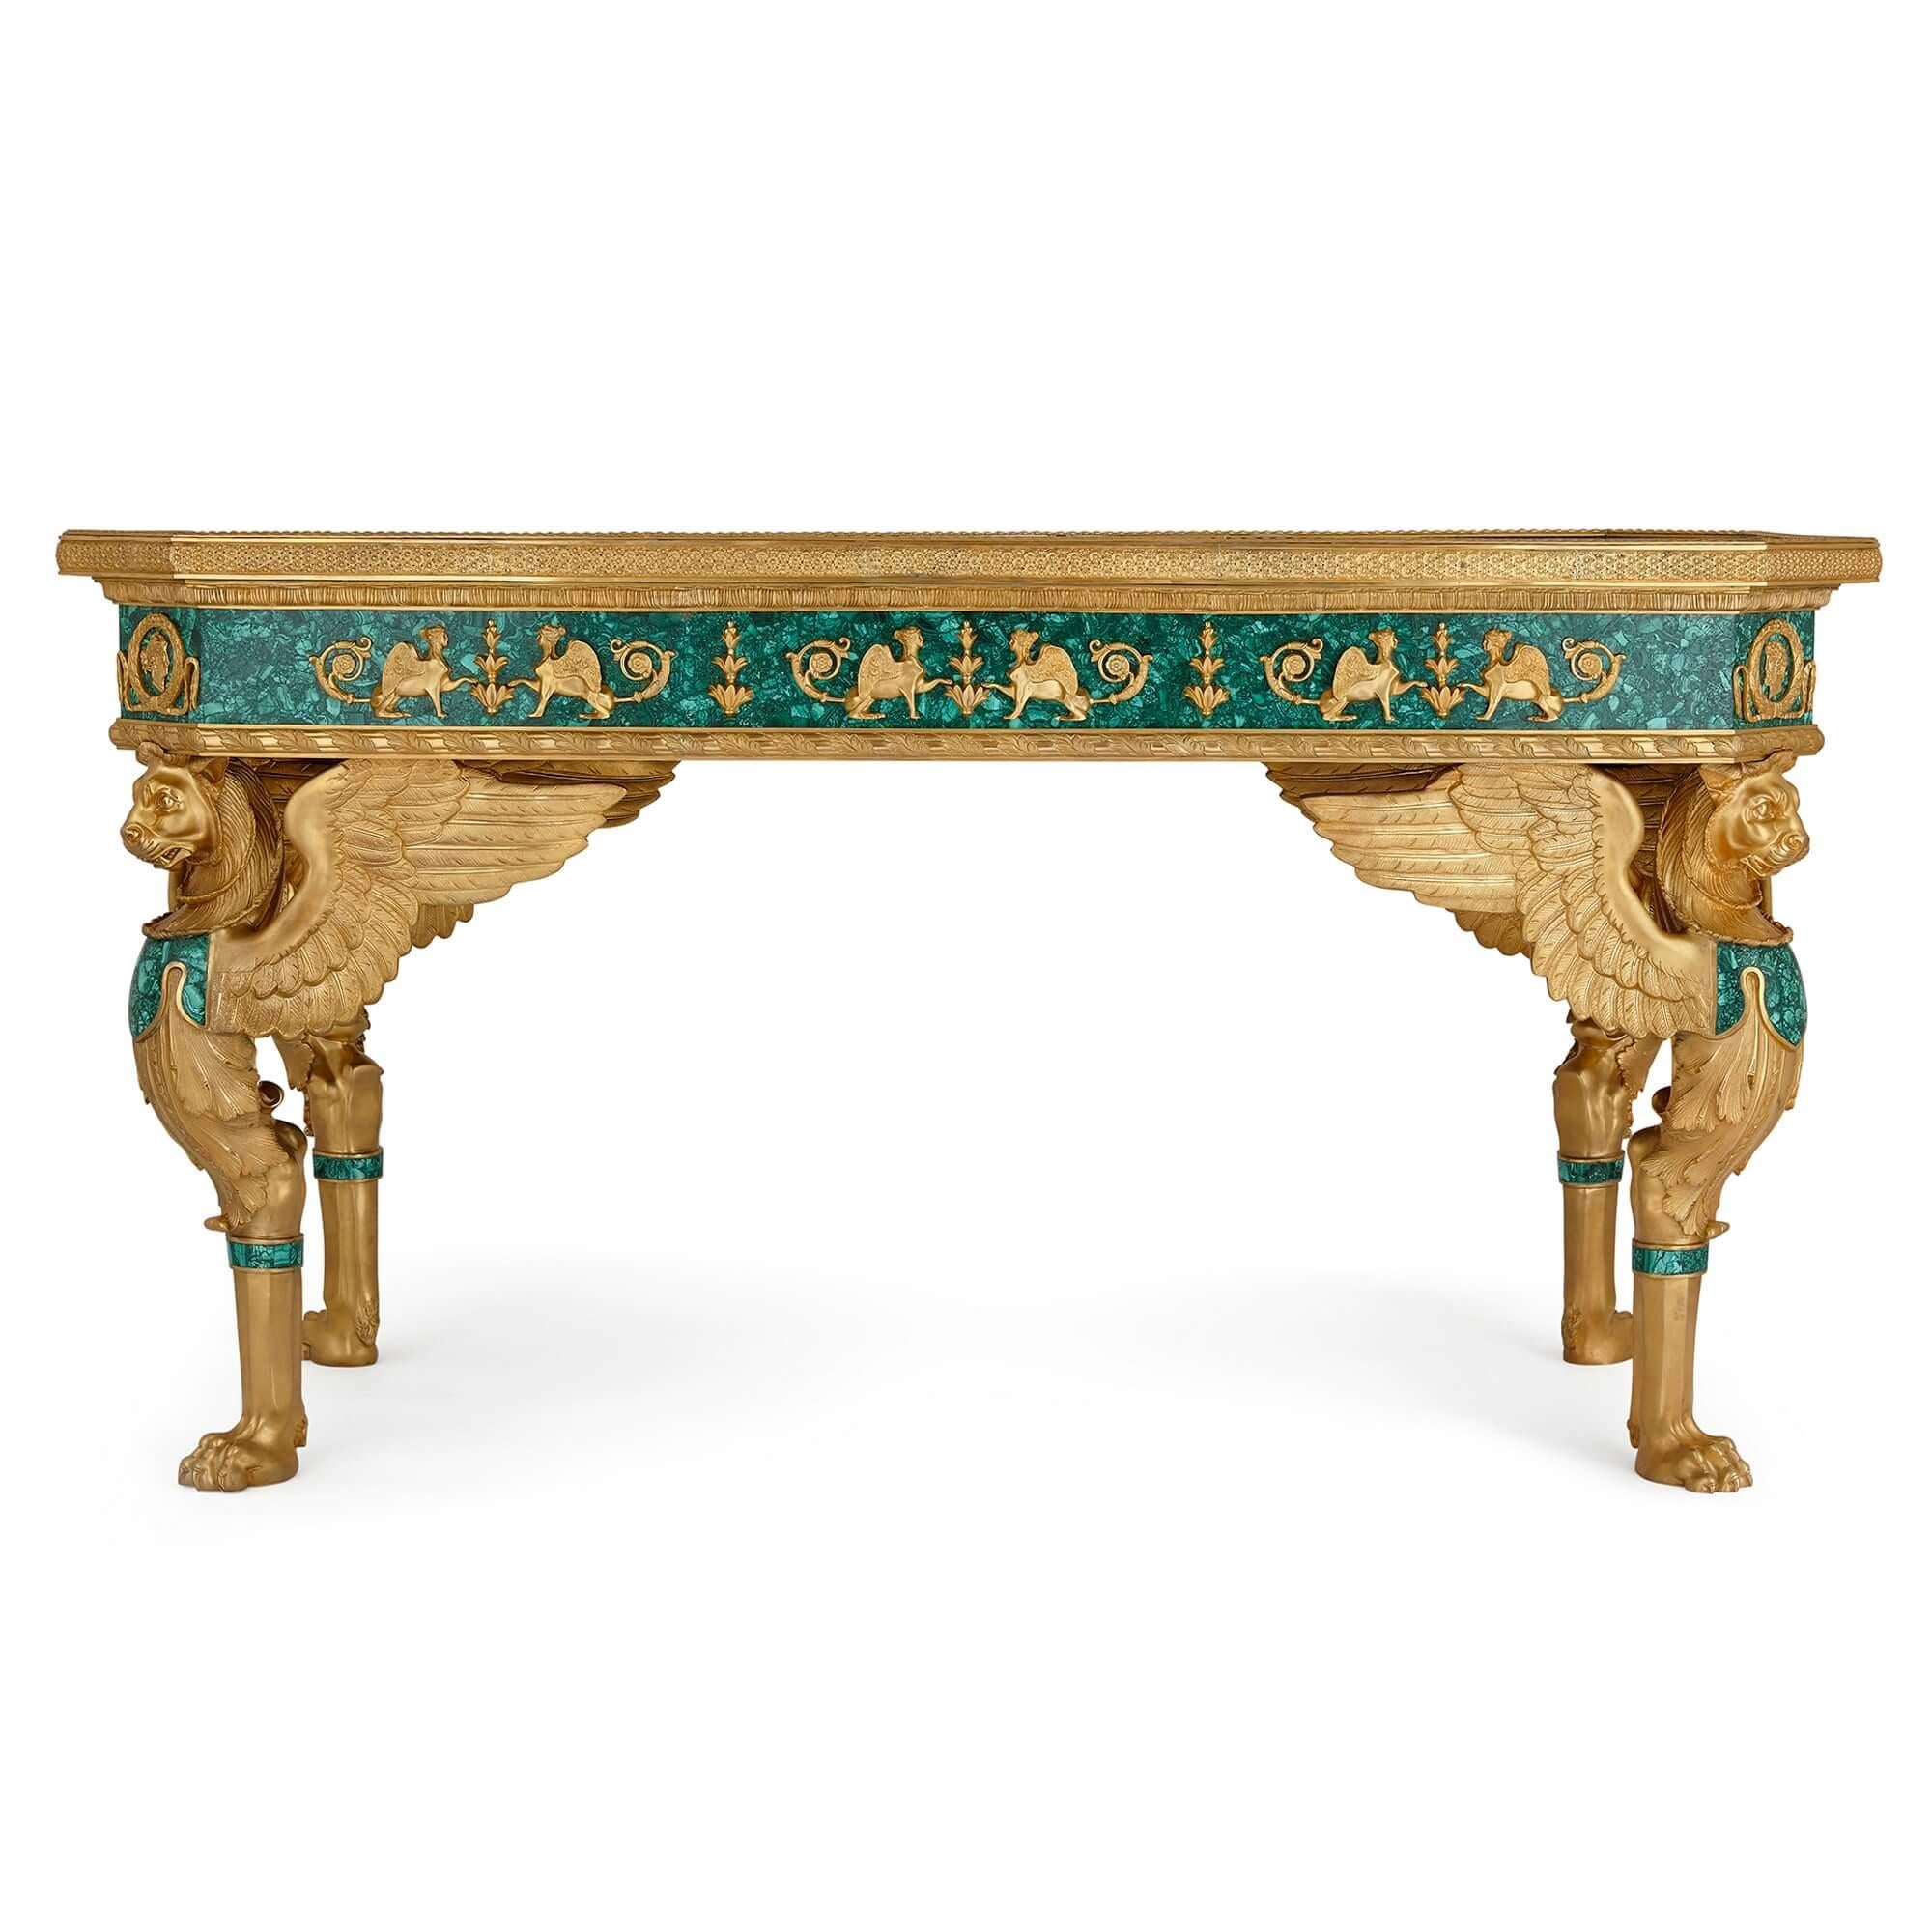 A large French Empire style gilt-bronze and malachite centre table.
French, 20th century.
Height: 85cm, width: 160cm, depth: 79cm

This superb table, a grand and highly impressive object, is a French Empire style table made of ormolu and